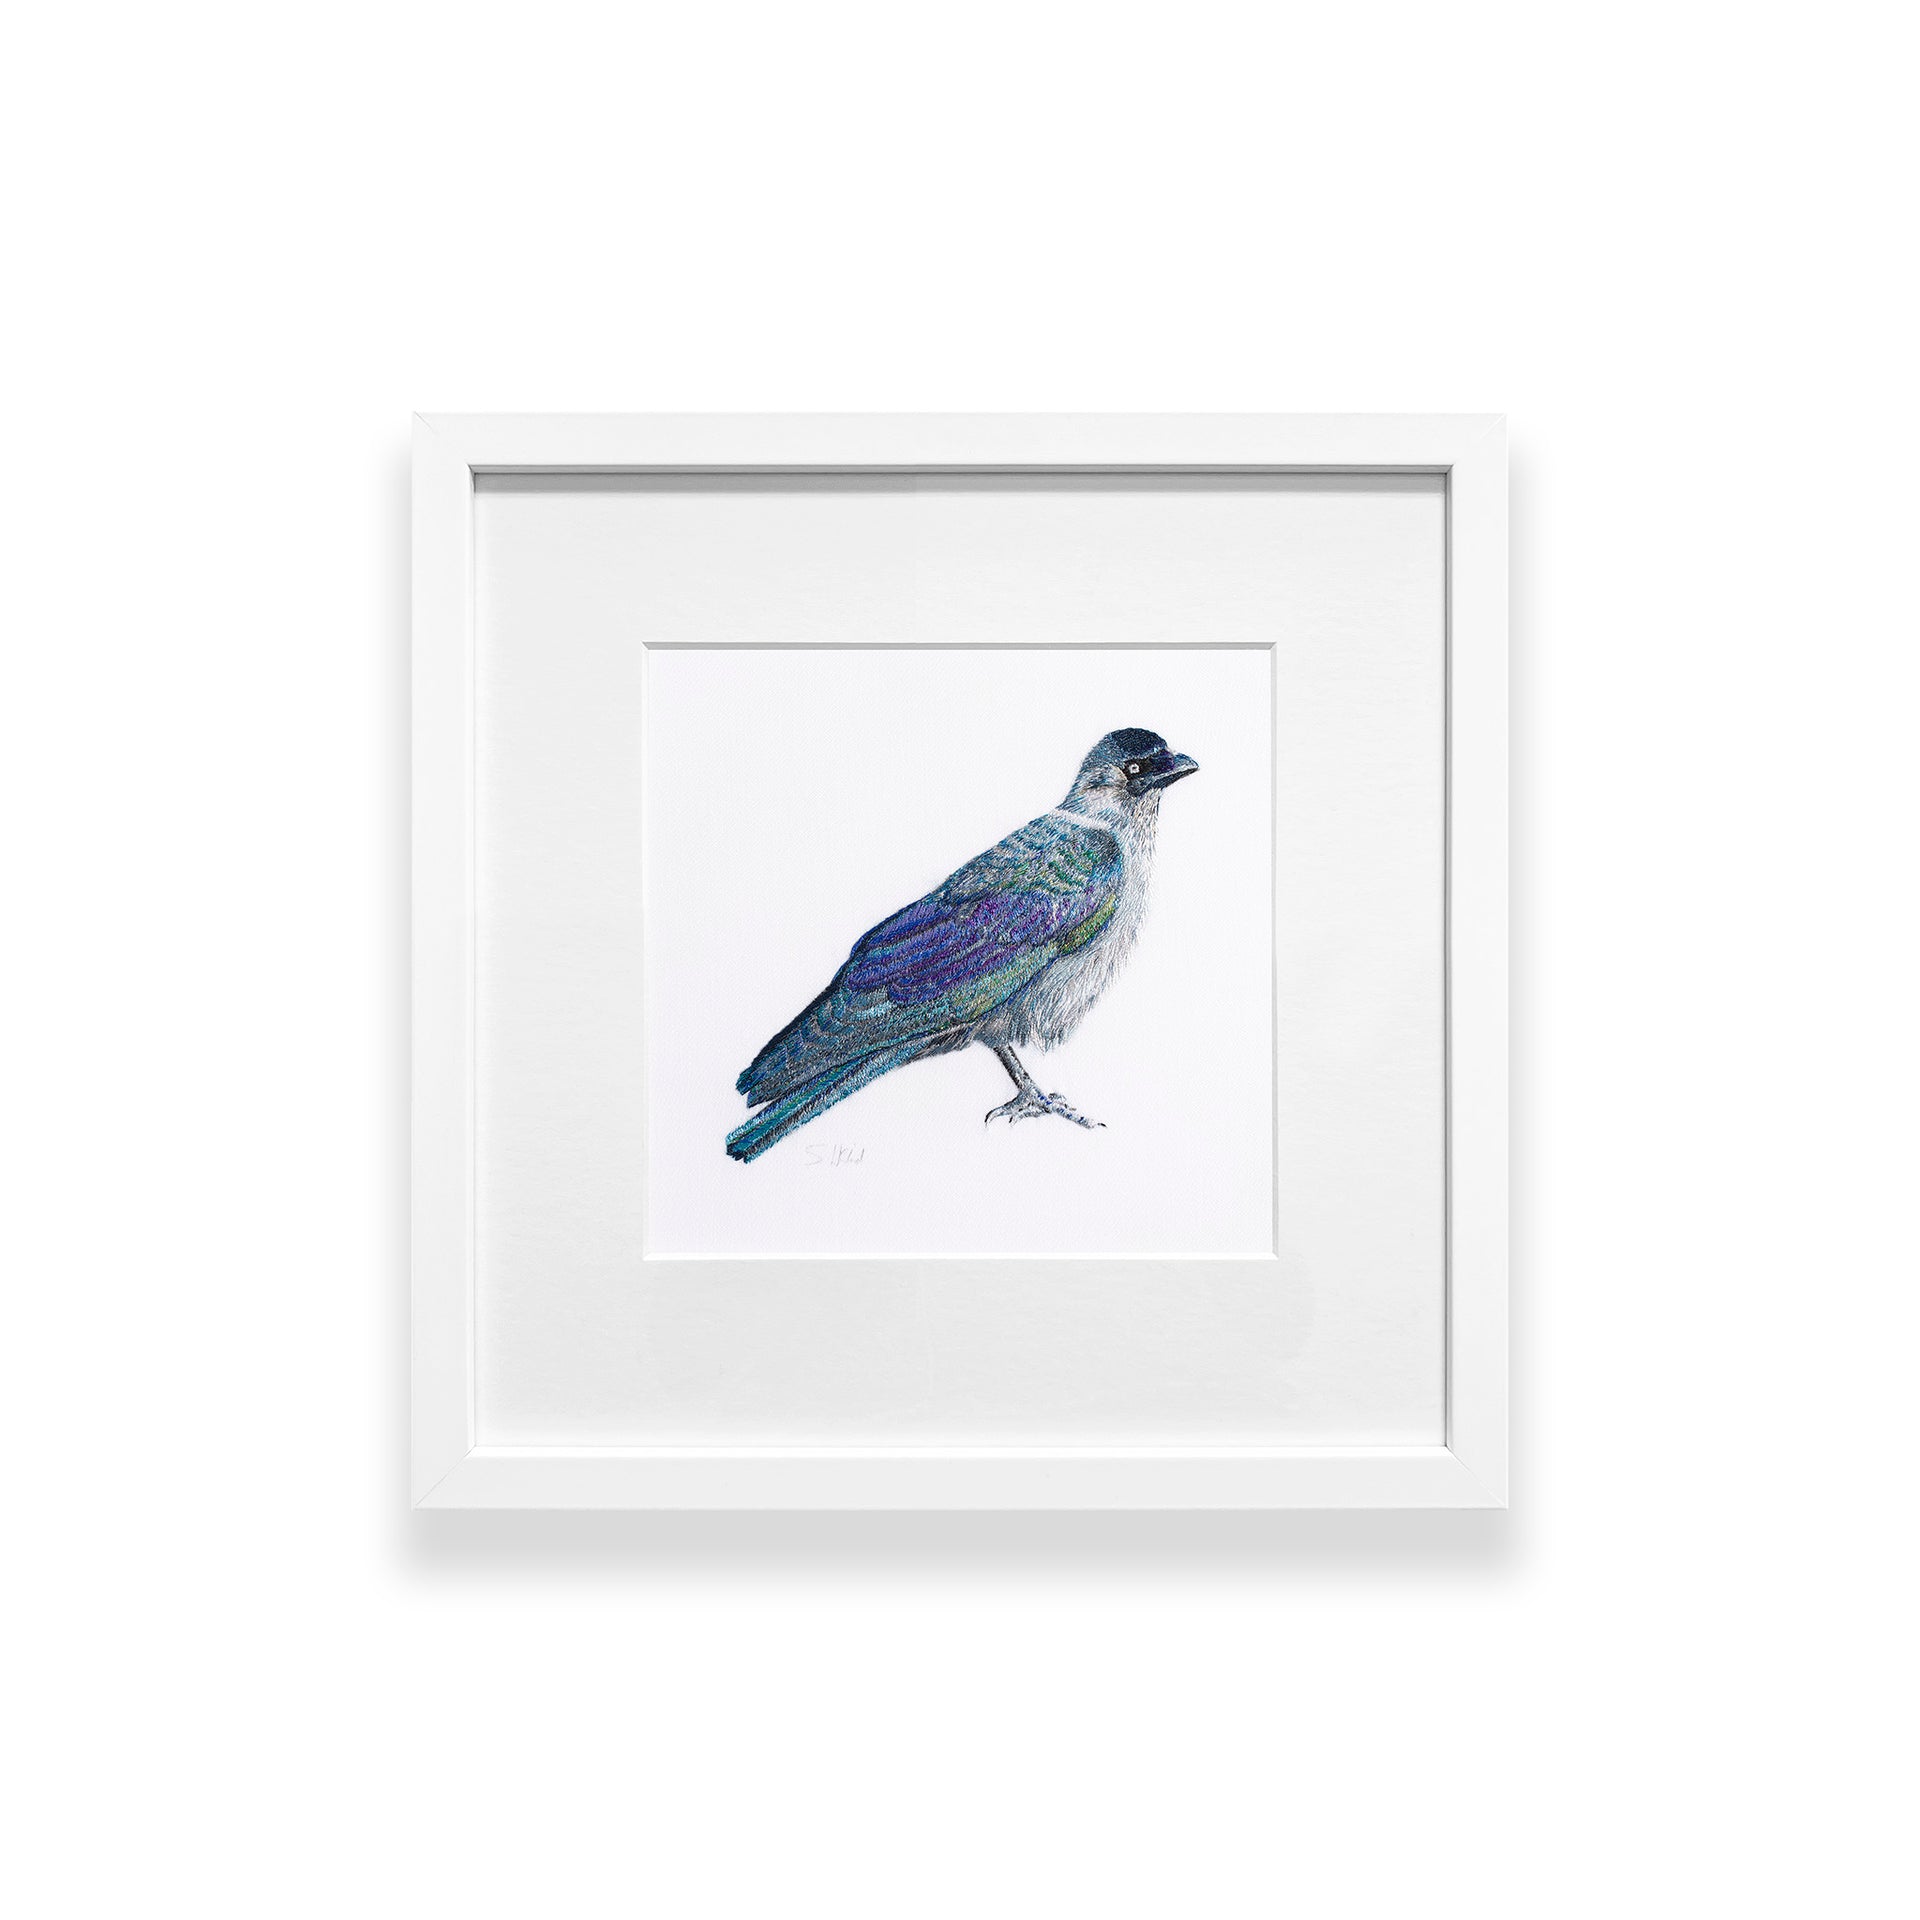 Hand embroidered jackdaw mounted and framed